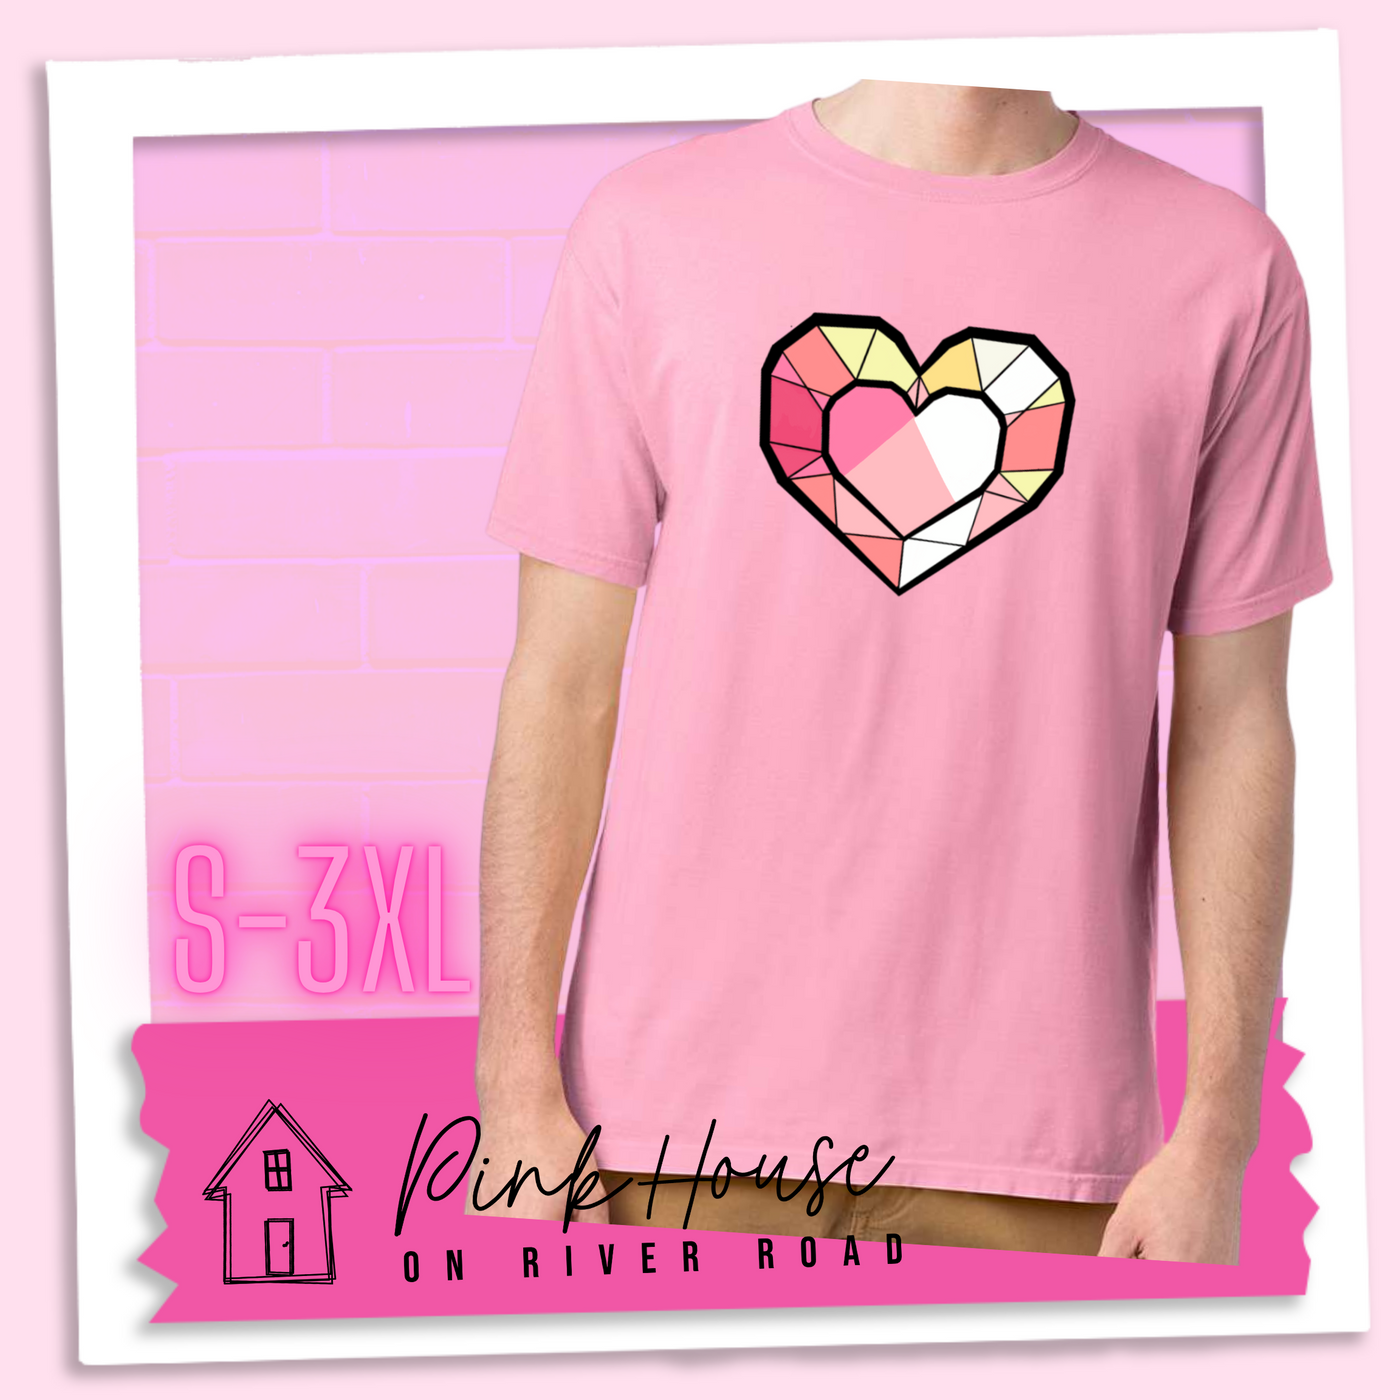 Cotton Candy Pink graphic tee. the graphic is of a geometric heart, it has black outlines to make it look like a gem with different shades of pinks, yellows, and white.